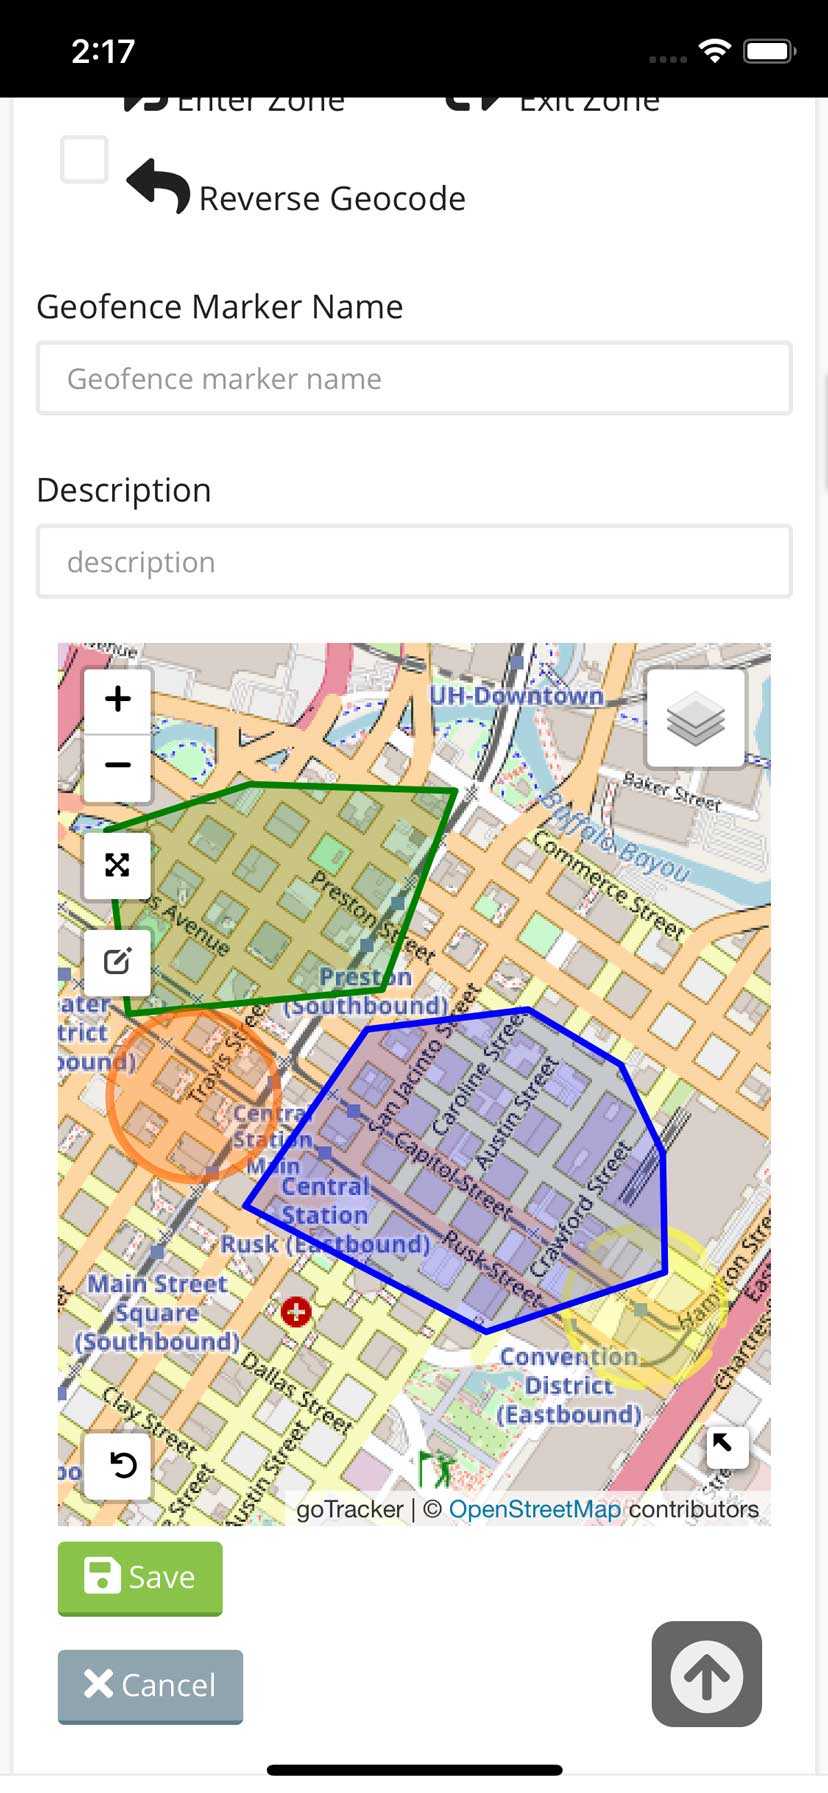 Fixed geofence